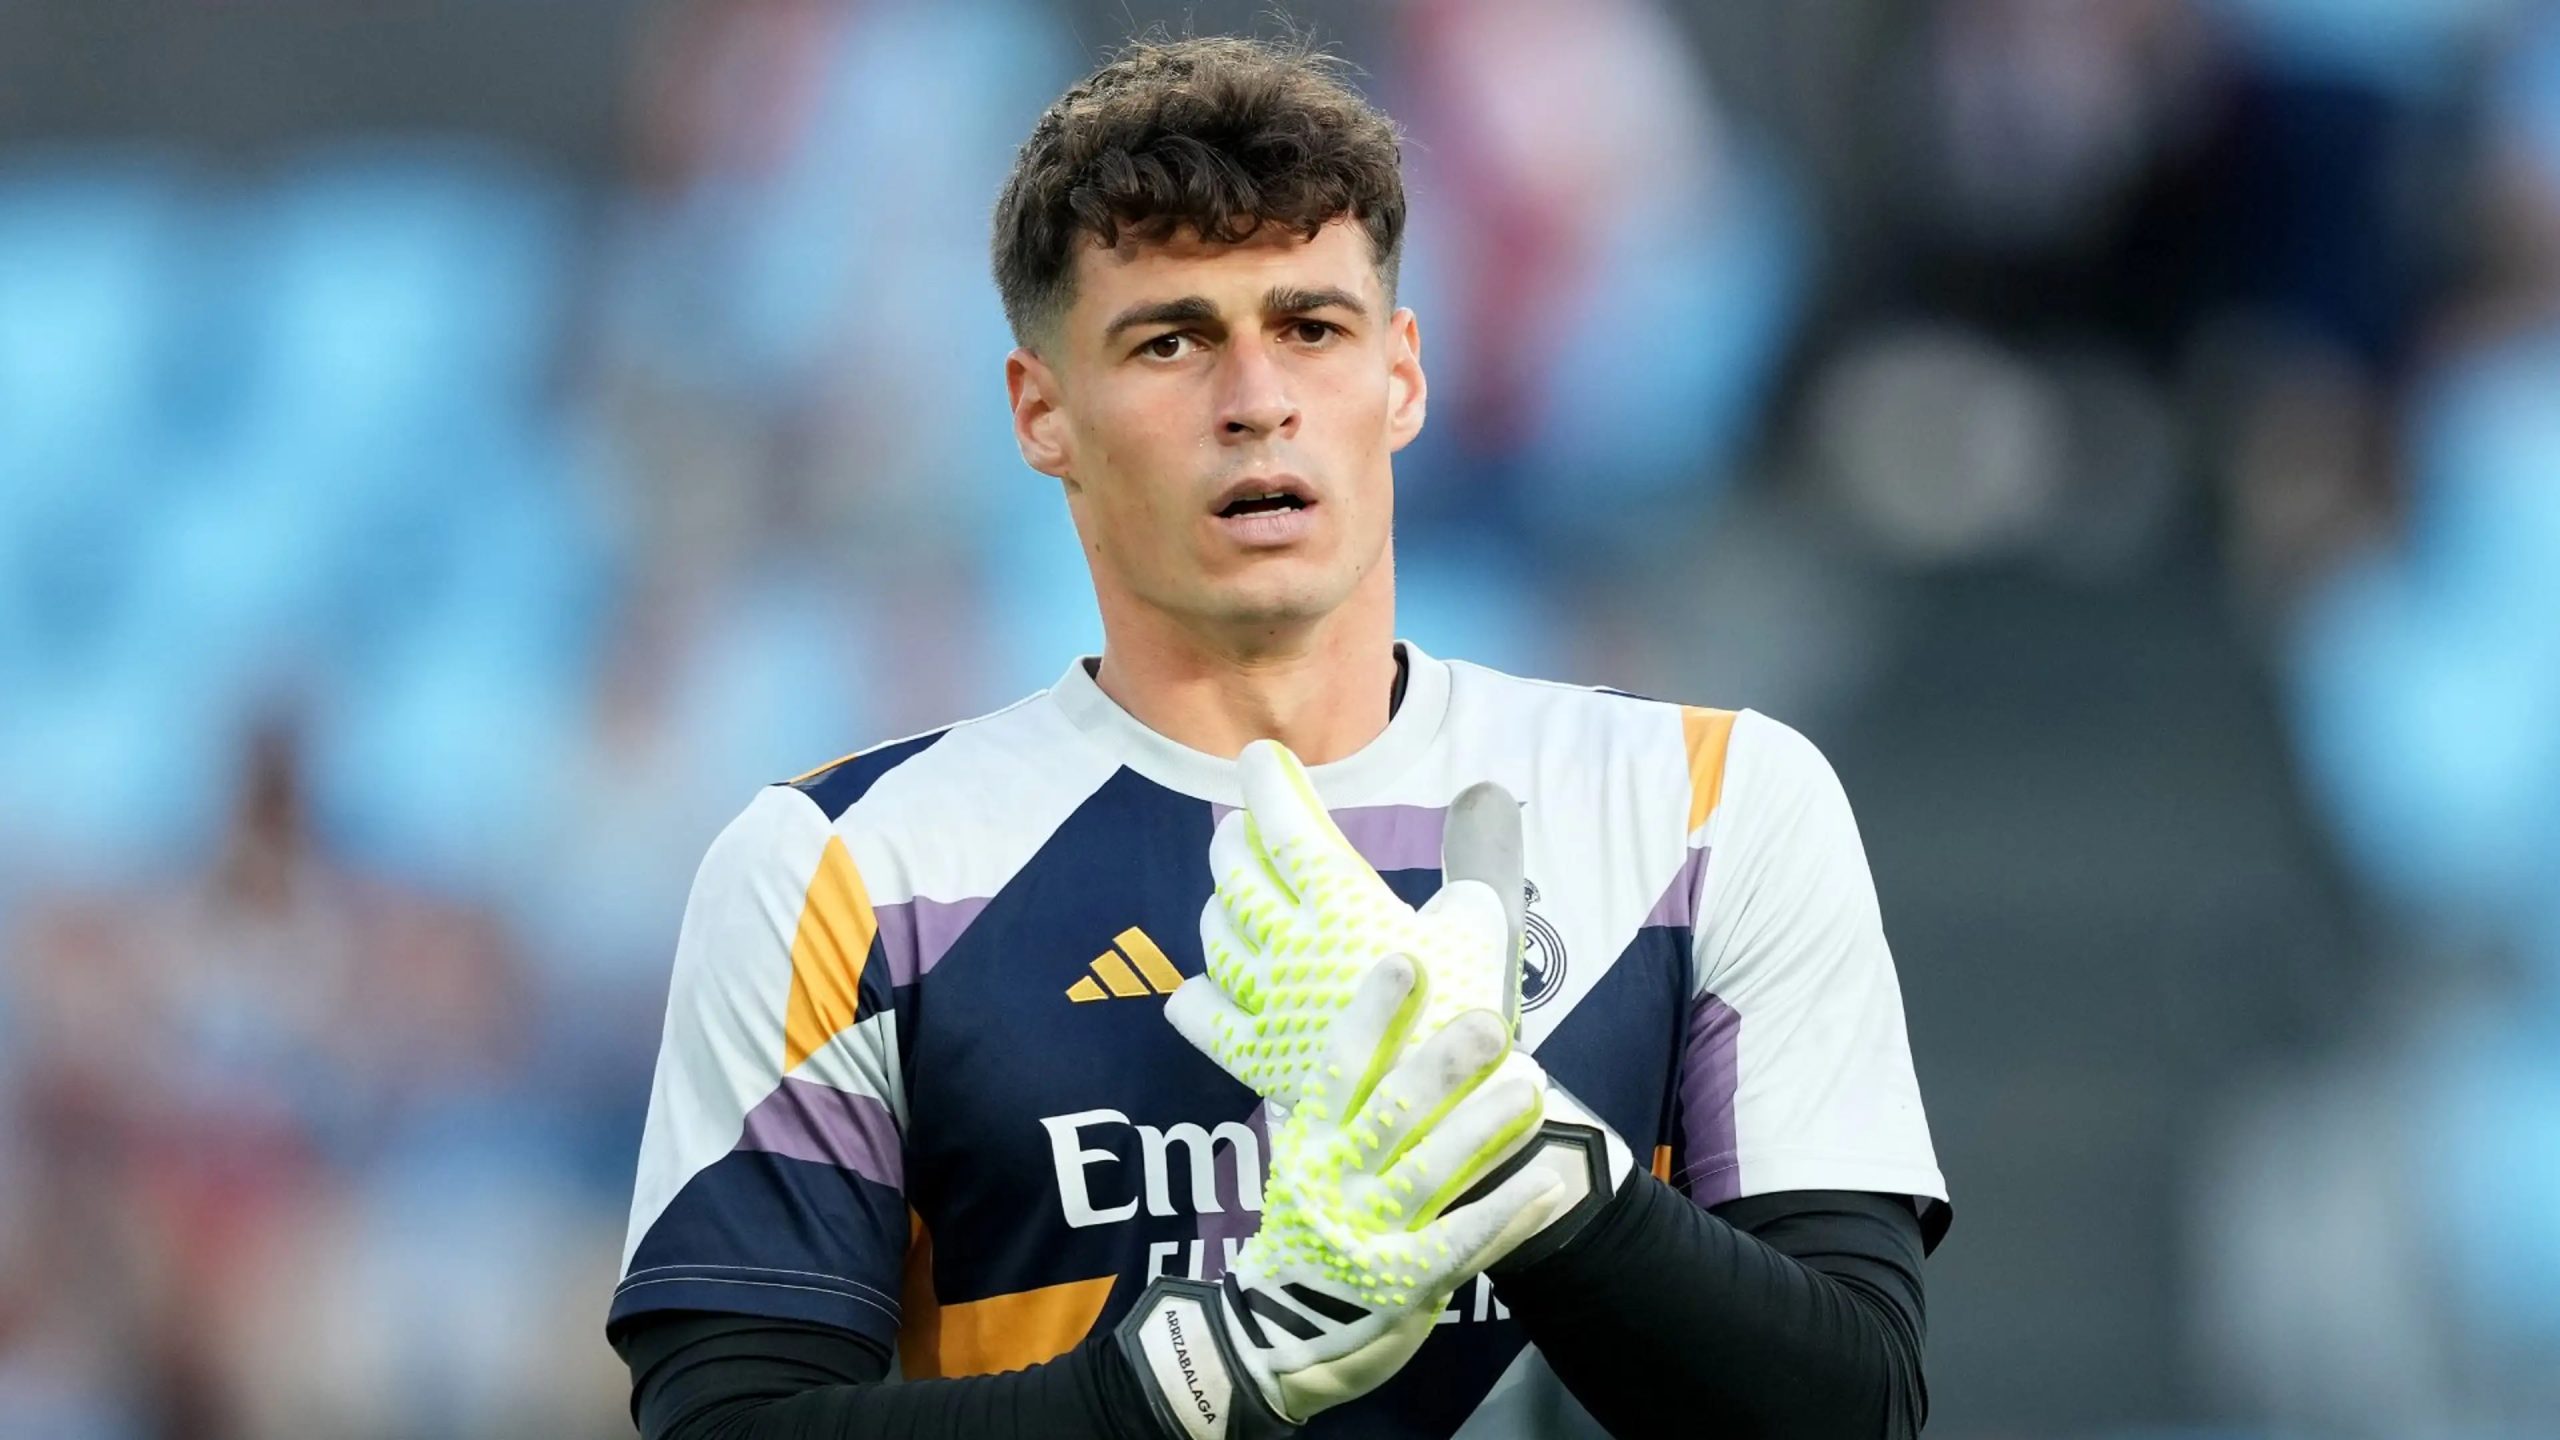 Here Is What Real Madrid Will Pay Chelsea To Get Kepa Arrizabalaga Permanently